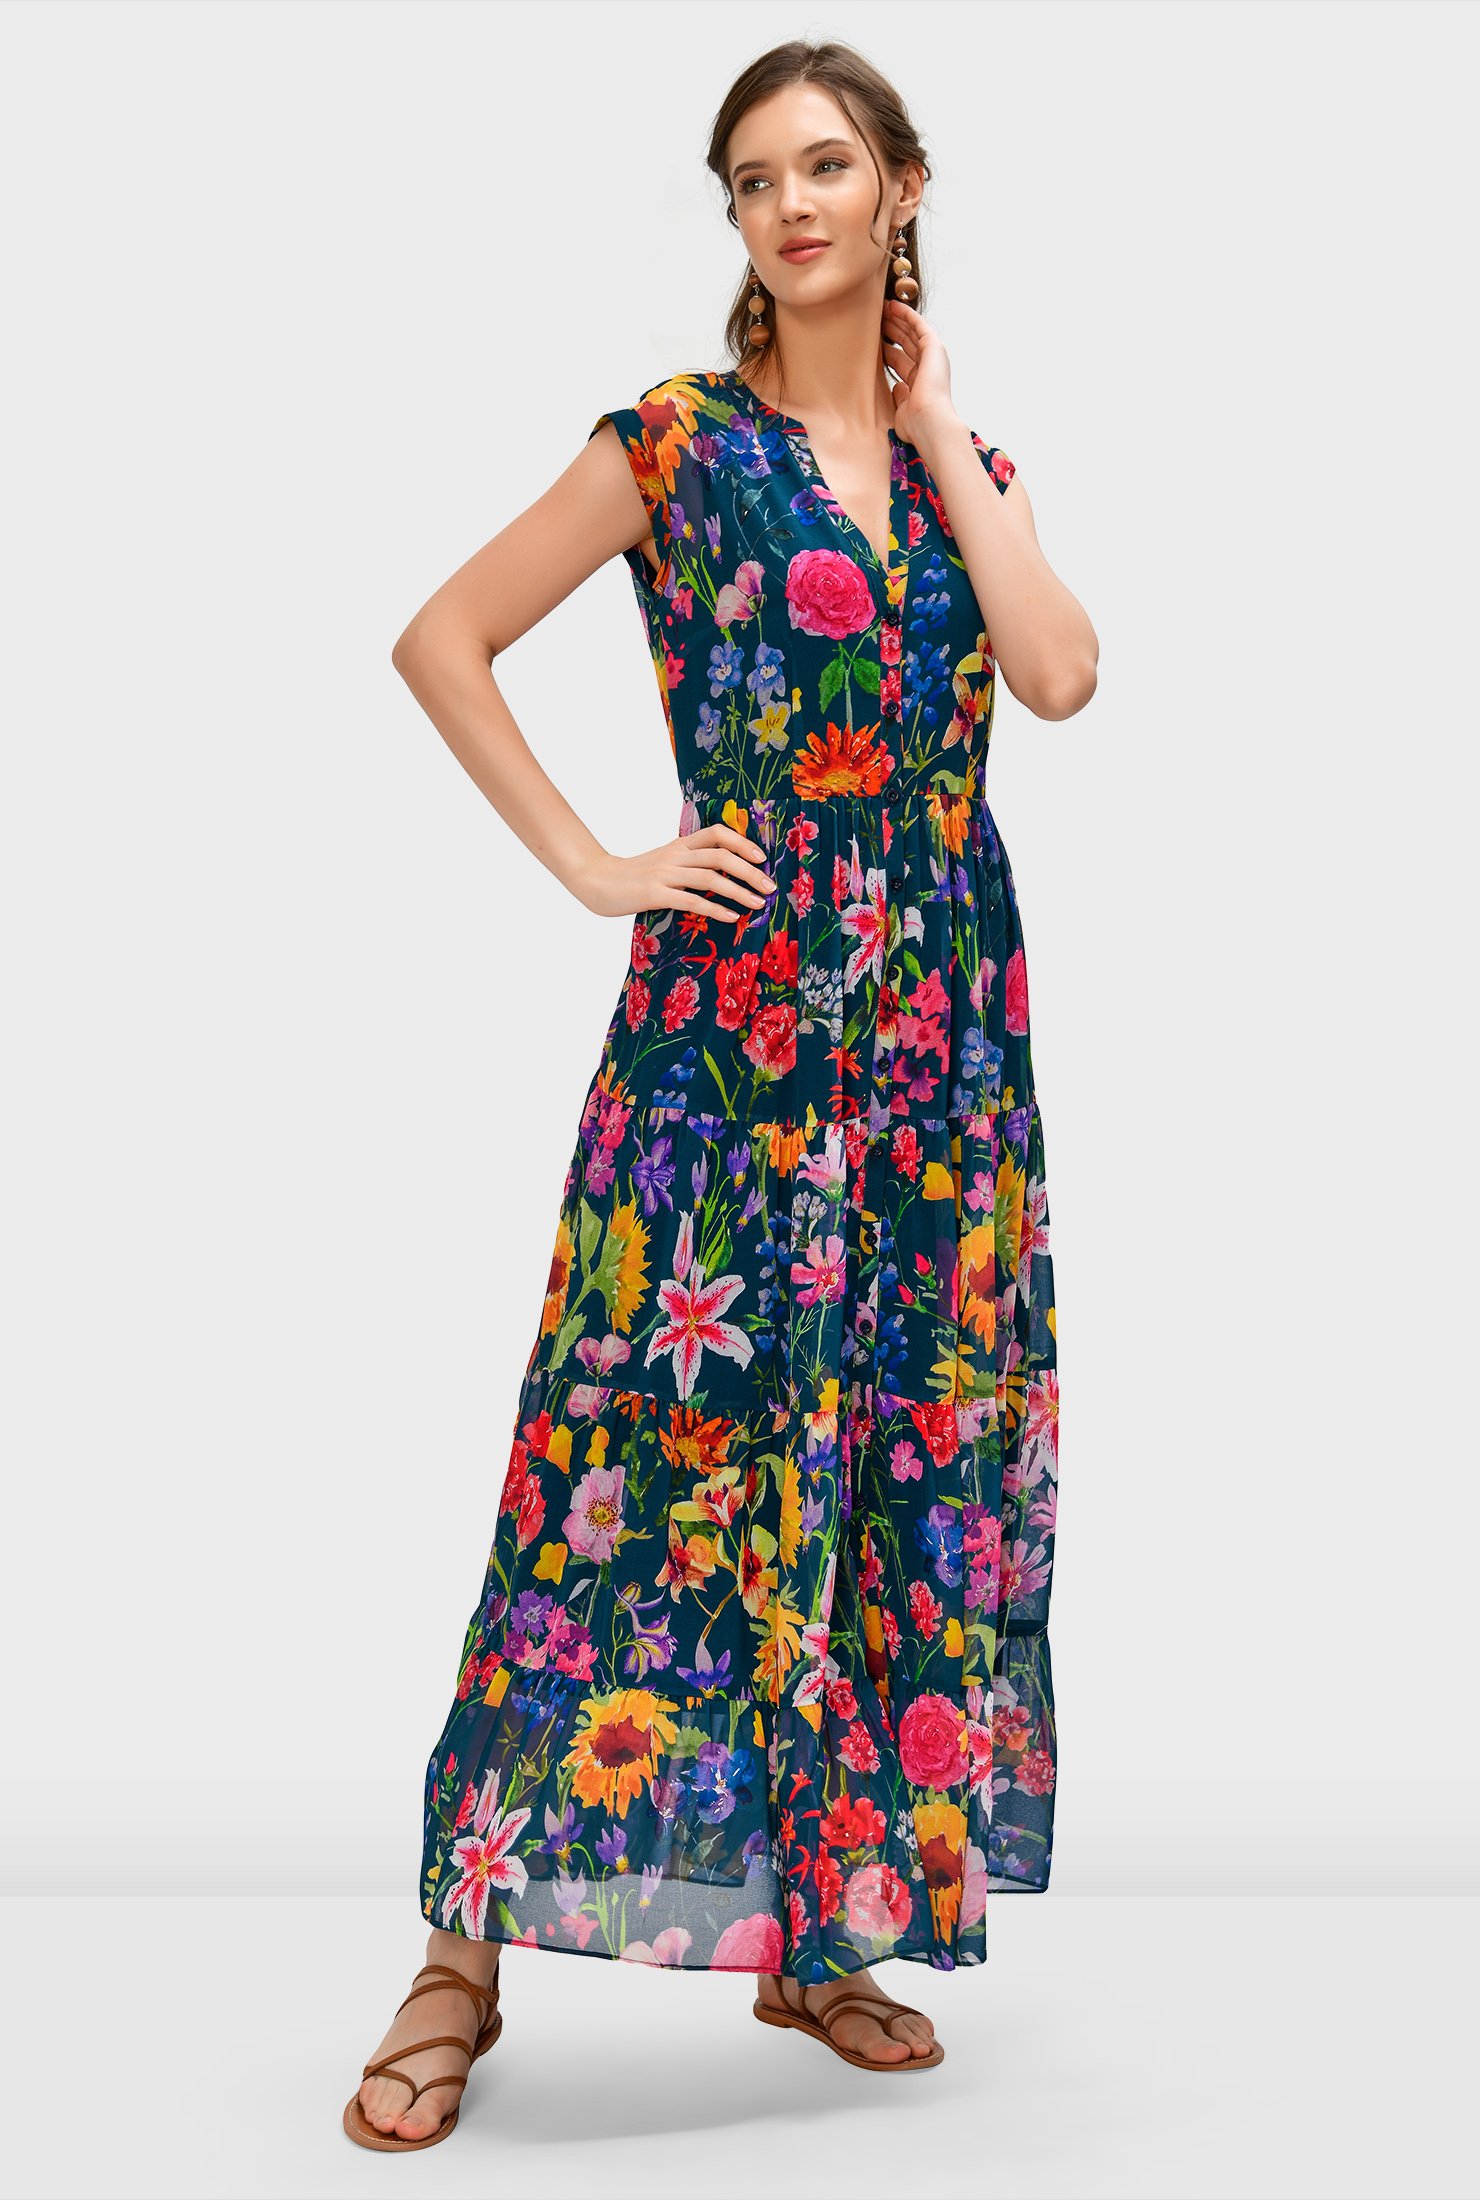 Let's wander and wonder in colorful-petaled florals and a breezy silhouette, everything you need to twirl in summer! Our floral-print georgette dress features ruched tiers at the skirt in a longer length that swirls beautifully as you move.